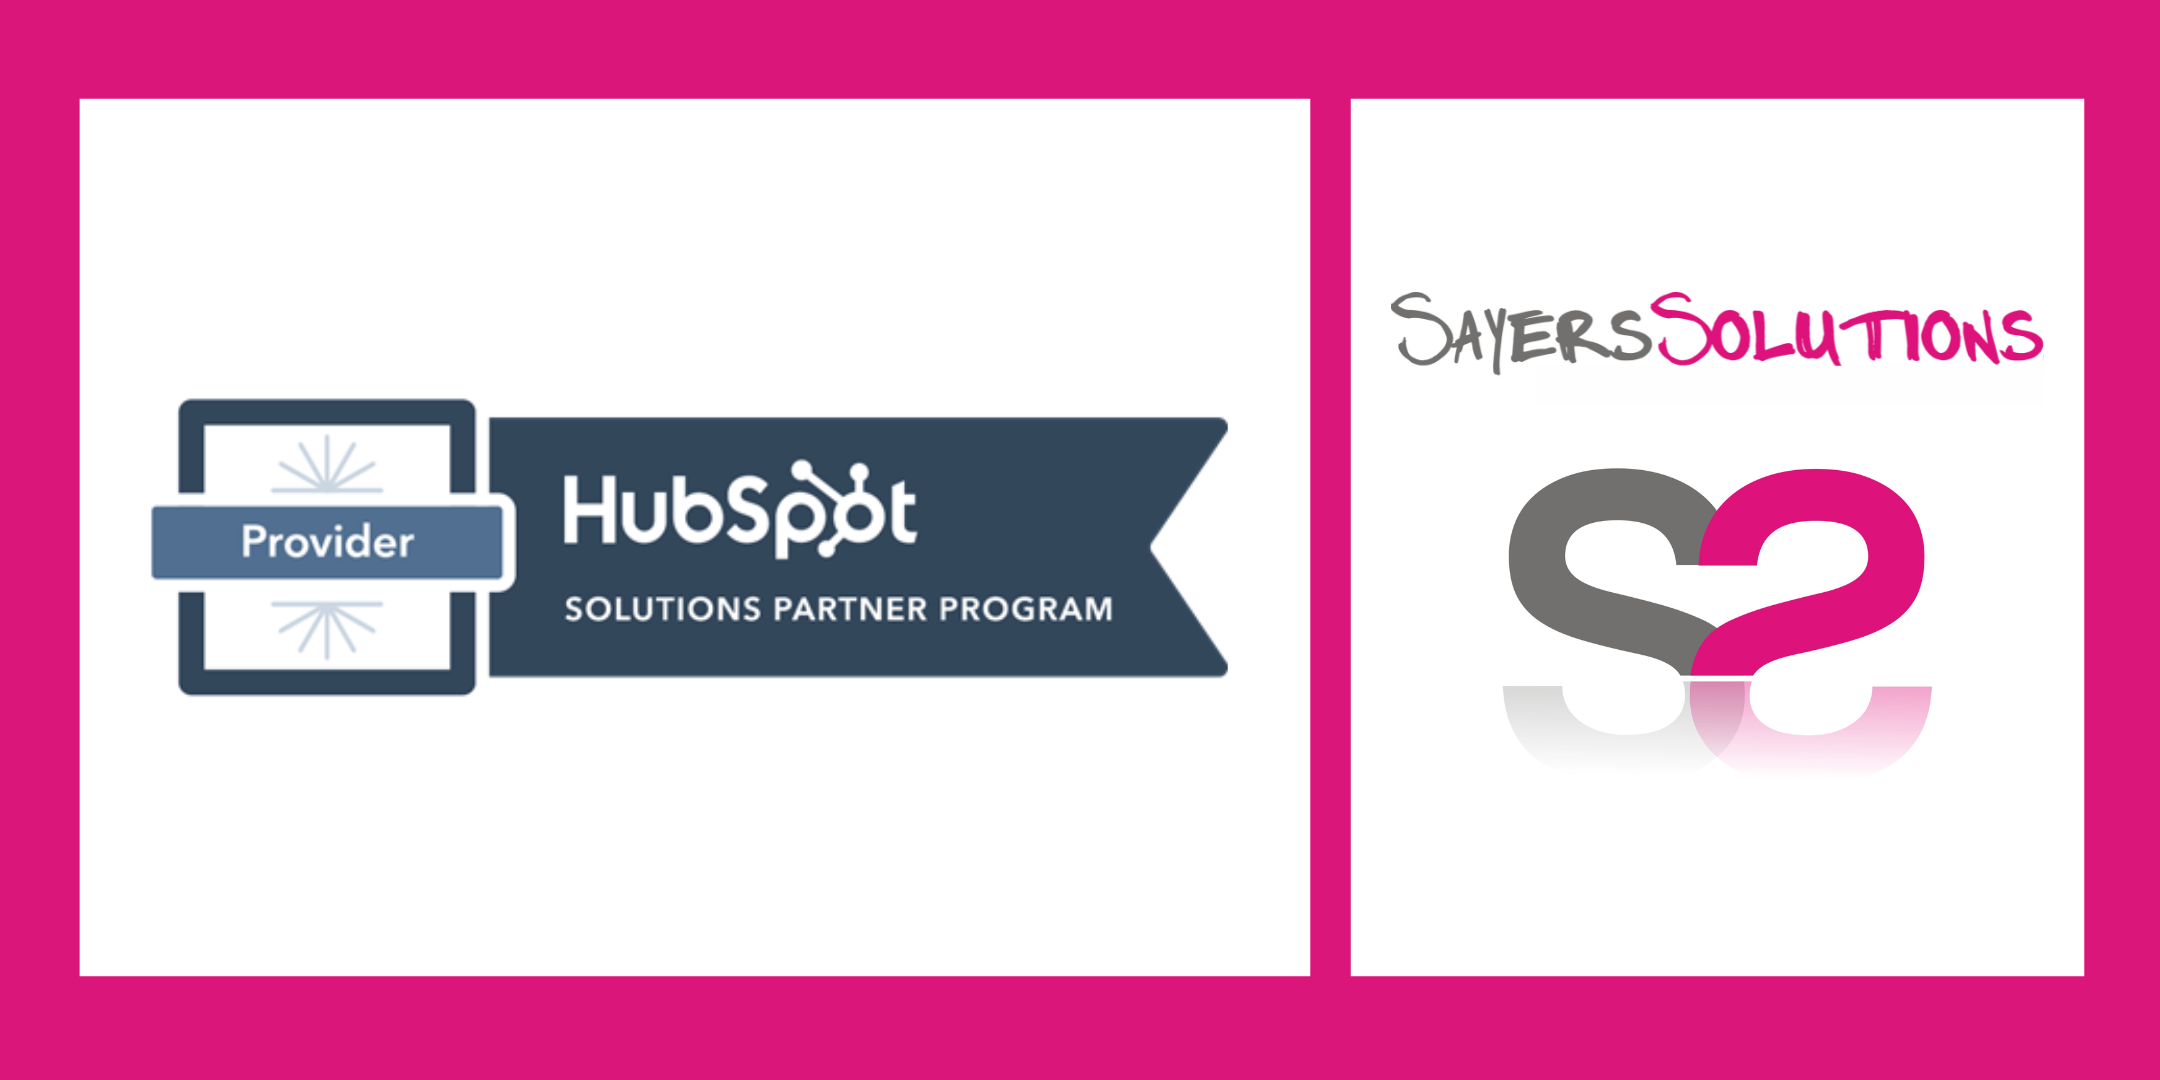 Sayers Solutions is a HubSpot Solutions Provider